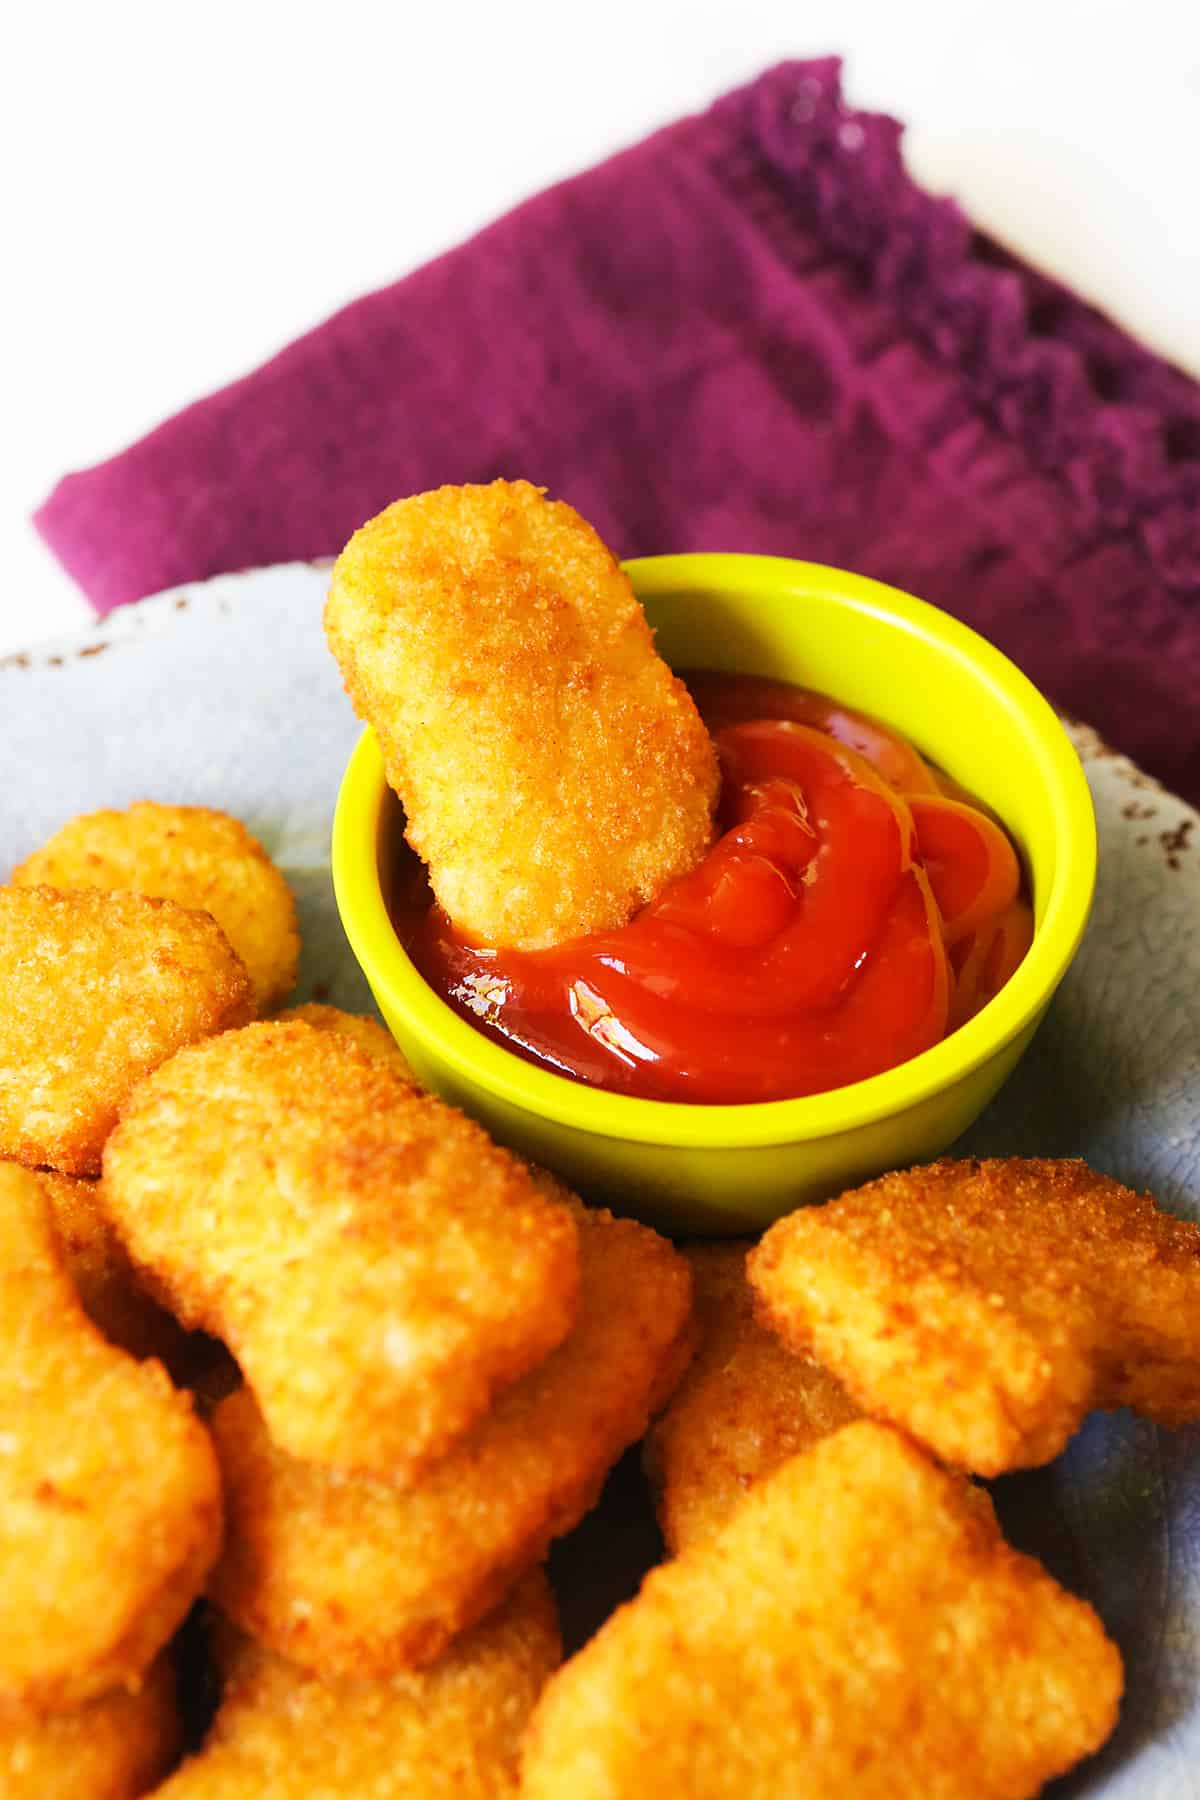 One air fryer chicken nugget dipped into a small bowl of ketchup.